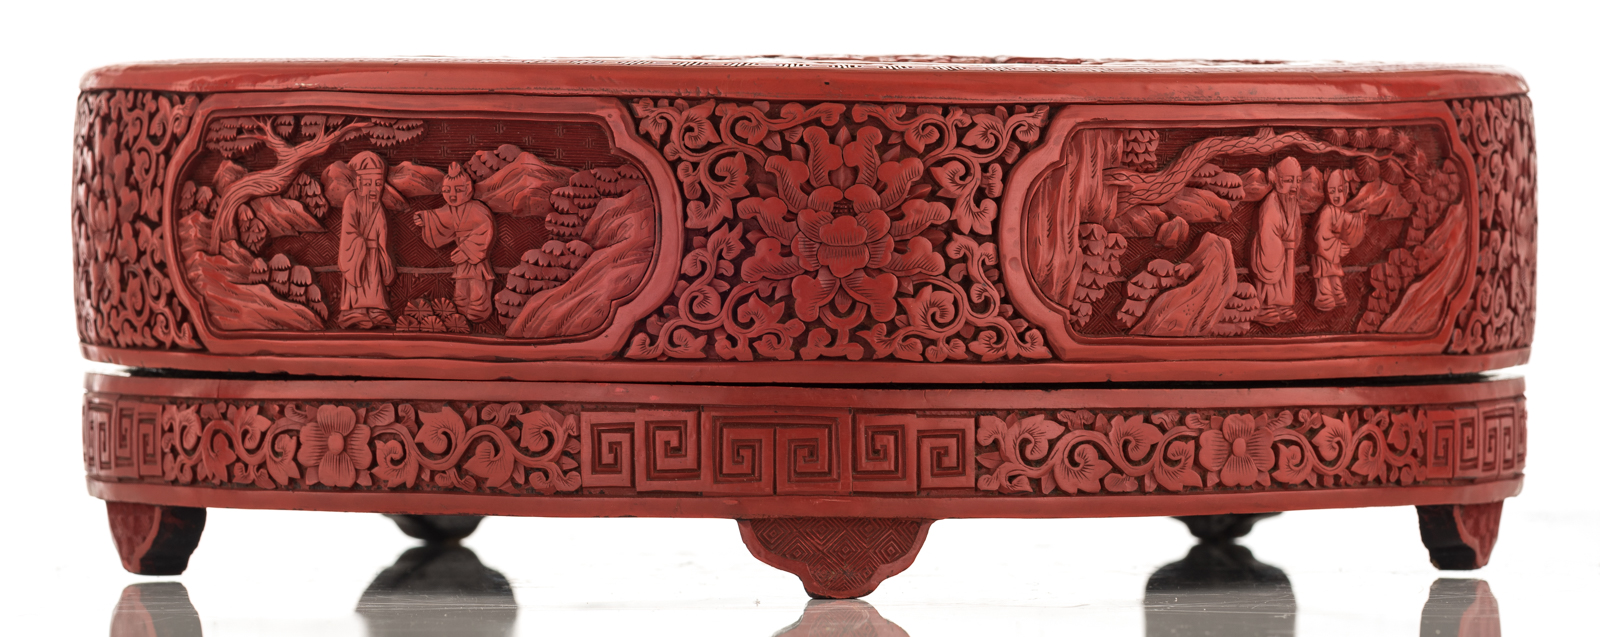 A Chinese Peking cinnabar lacquered sweetmeat box and cover, H 11,5 - ø 32,5 cm - Image 2 of 8